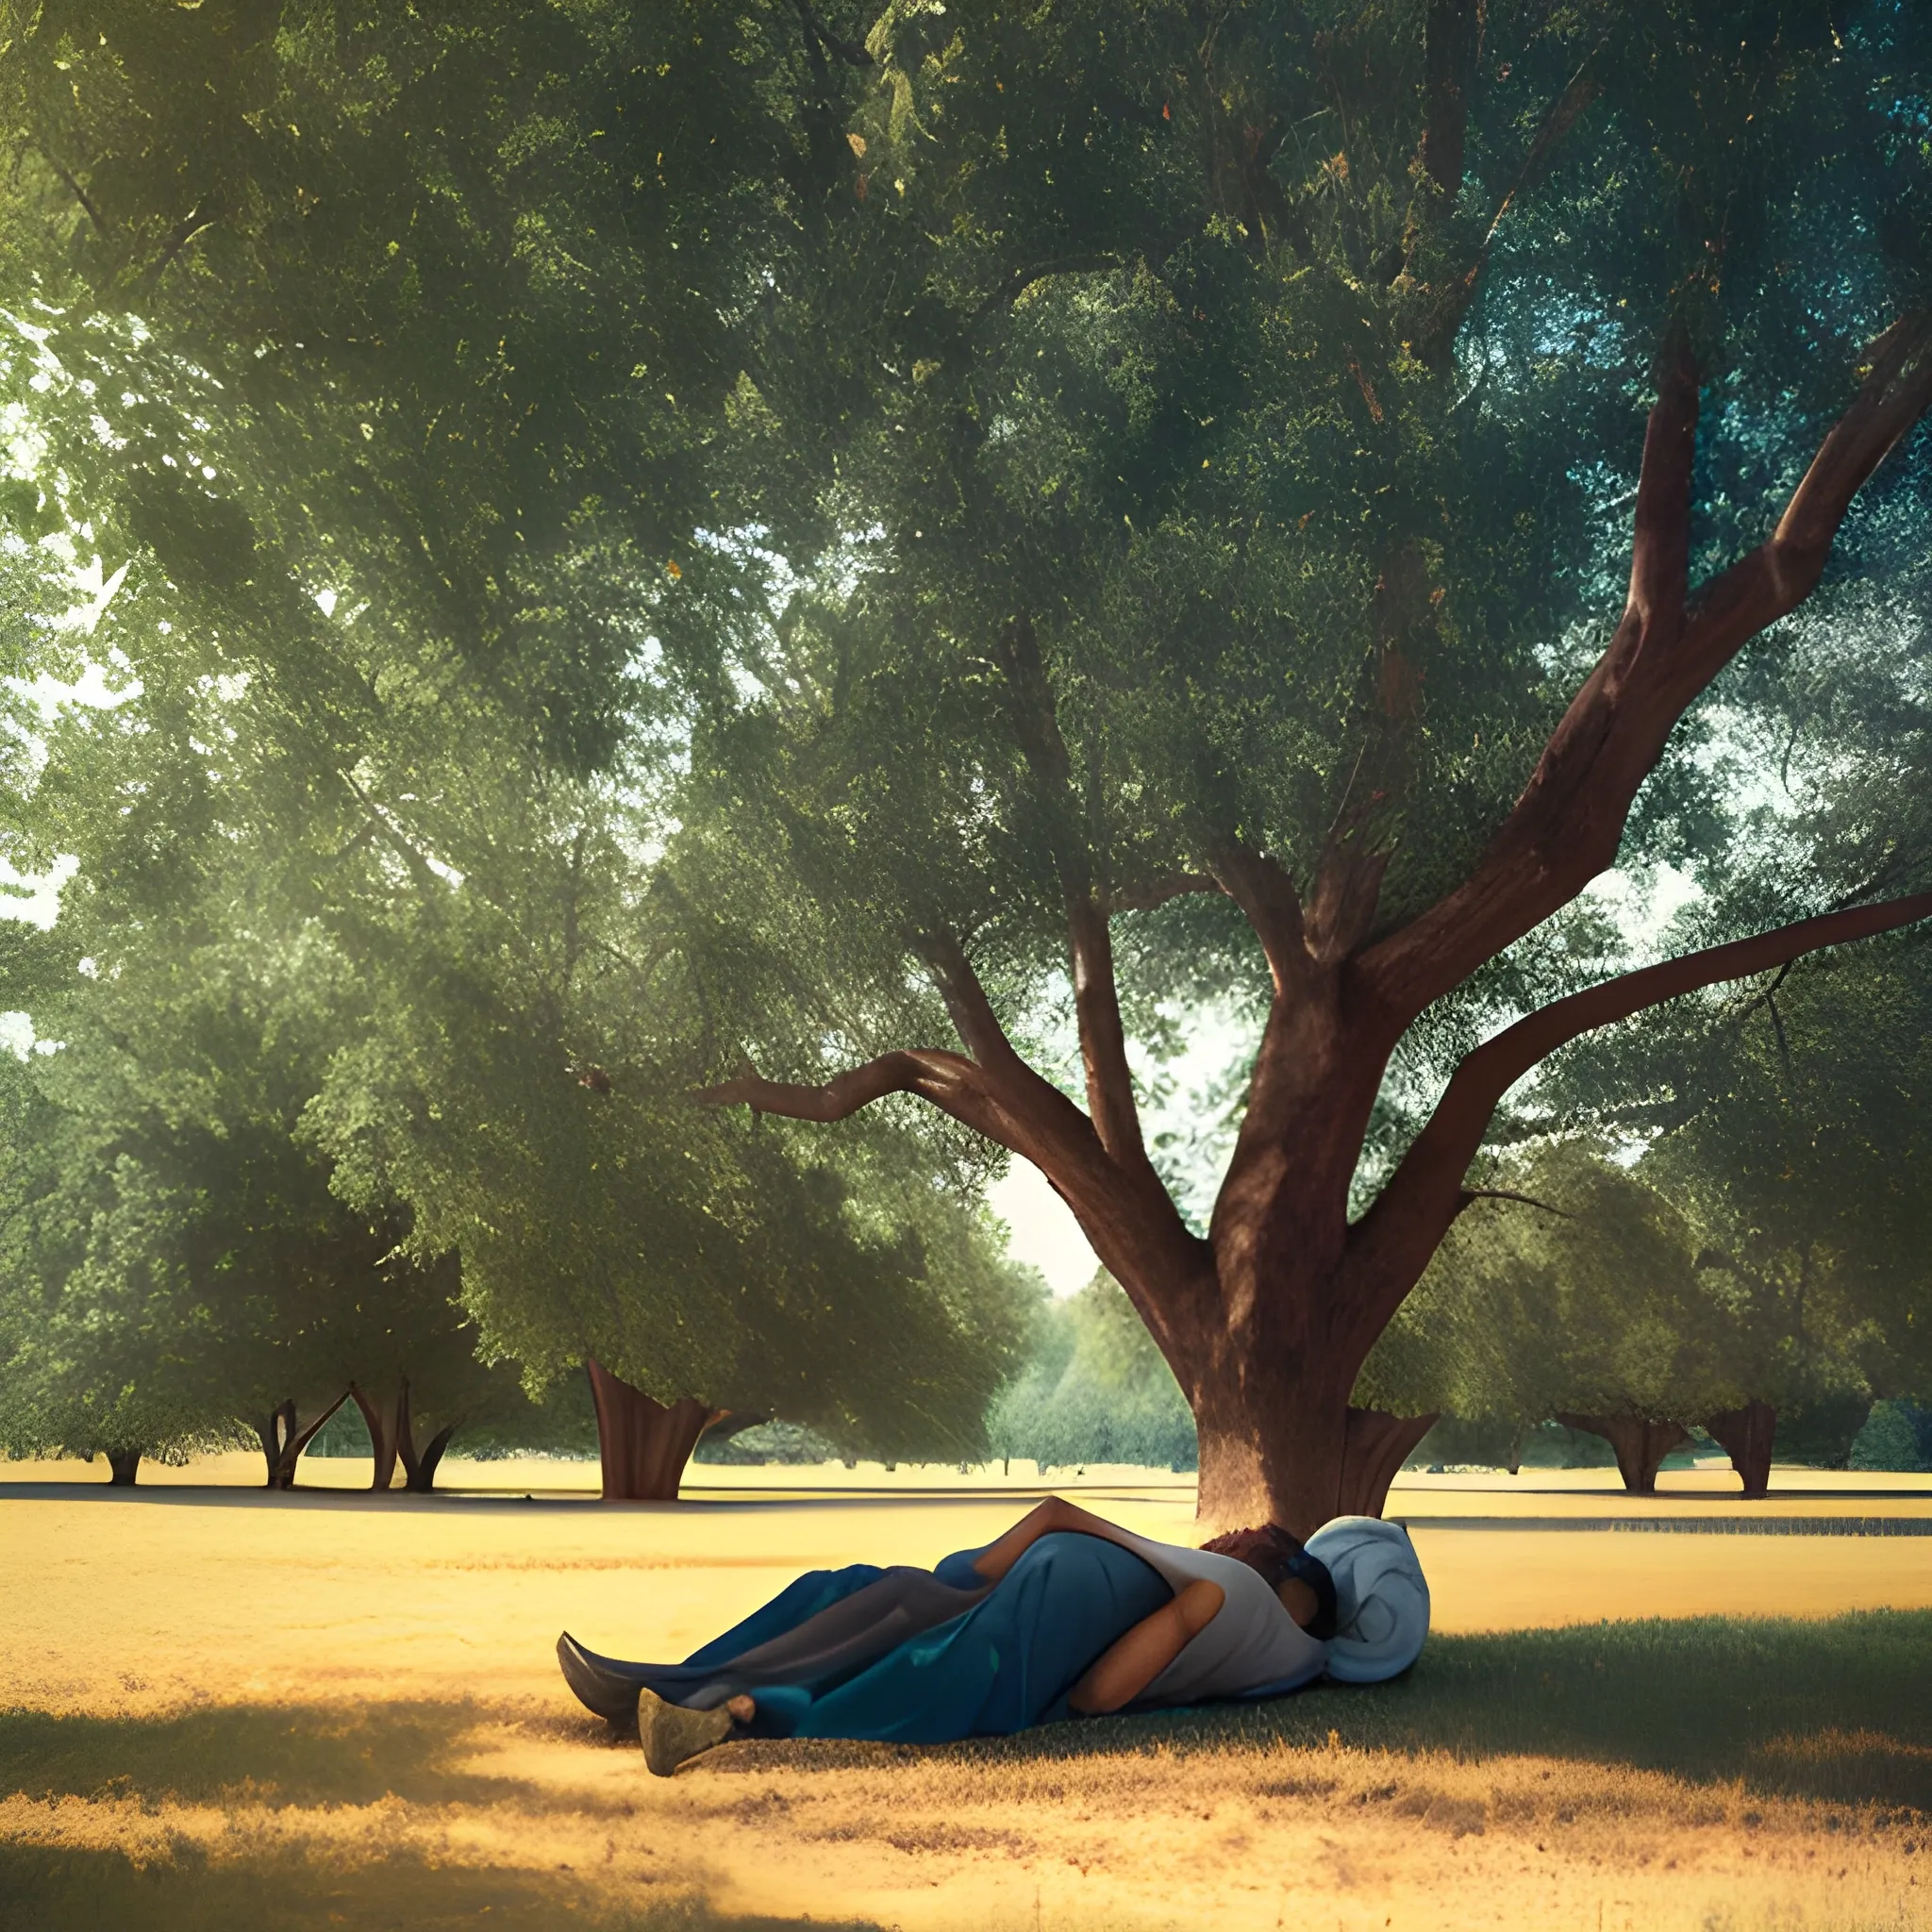 a man laying under the tree
